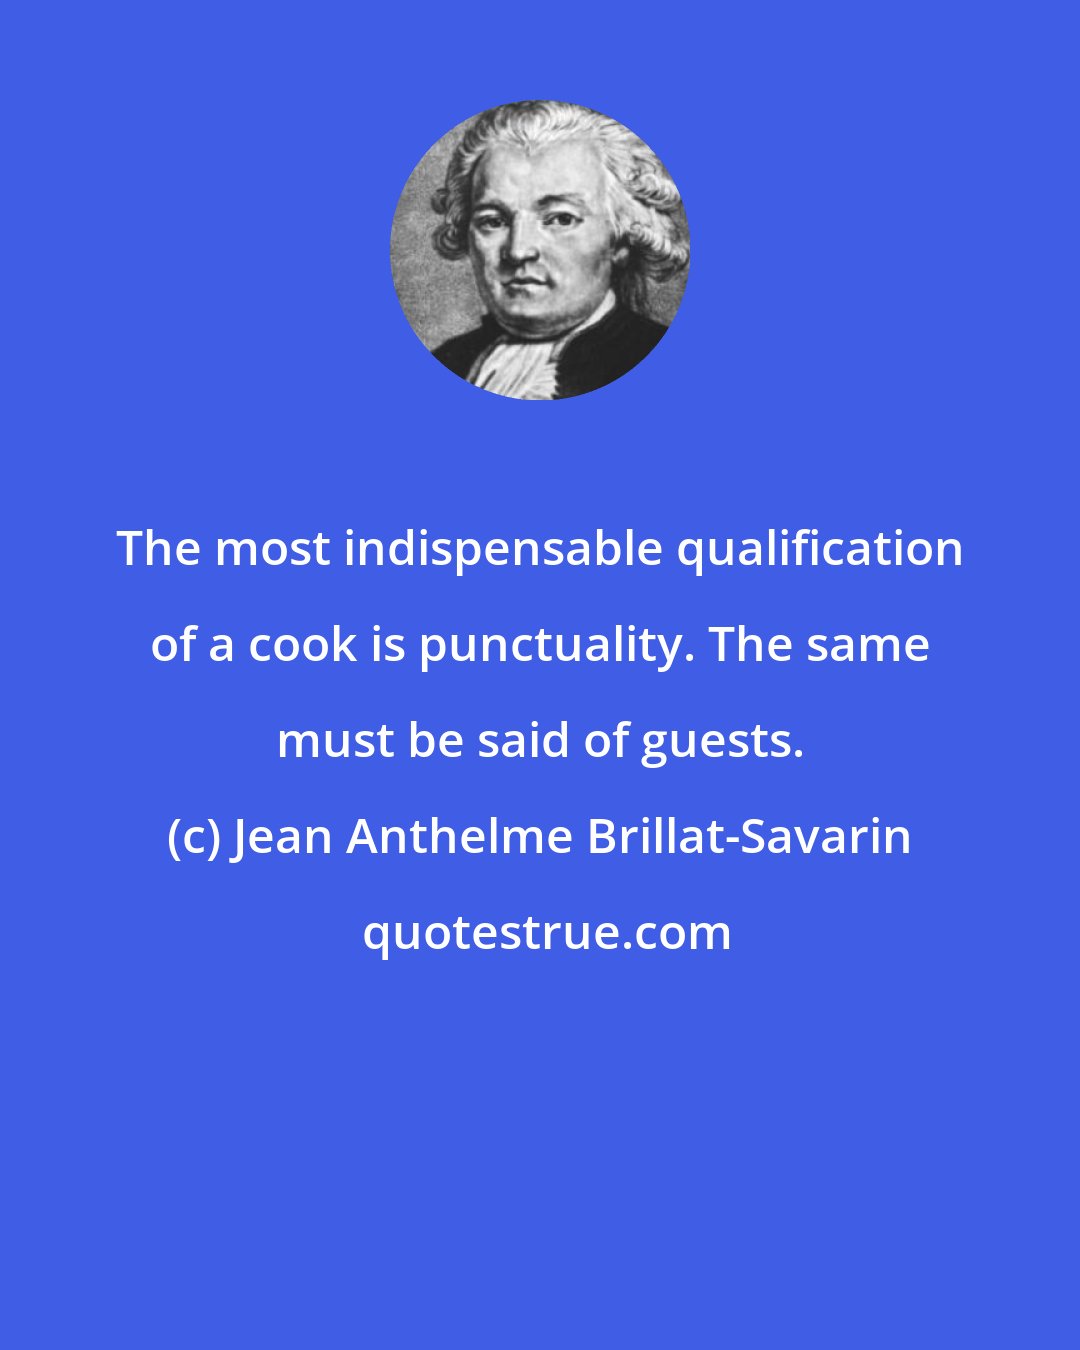 Jean Anthelme Brillat-Savarin: The most indispensable qualification of a cook is punctuality. The same must be said of guests.